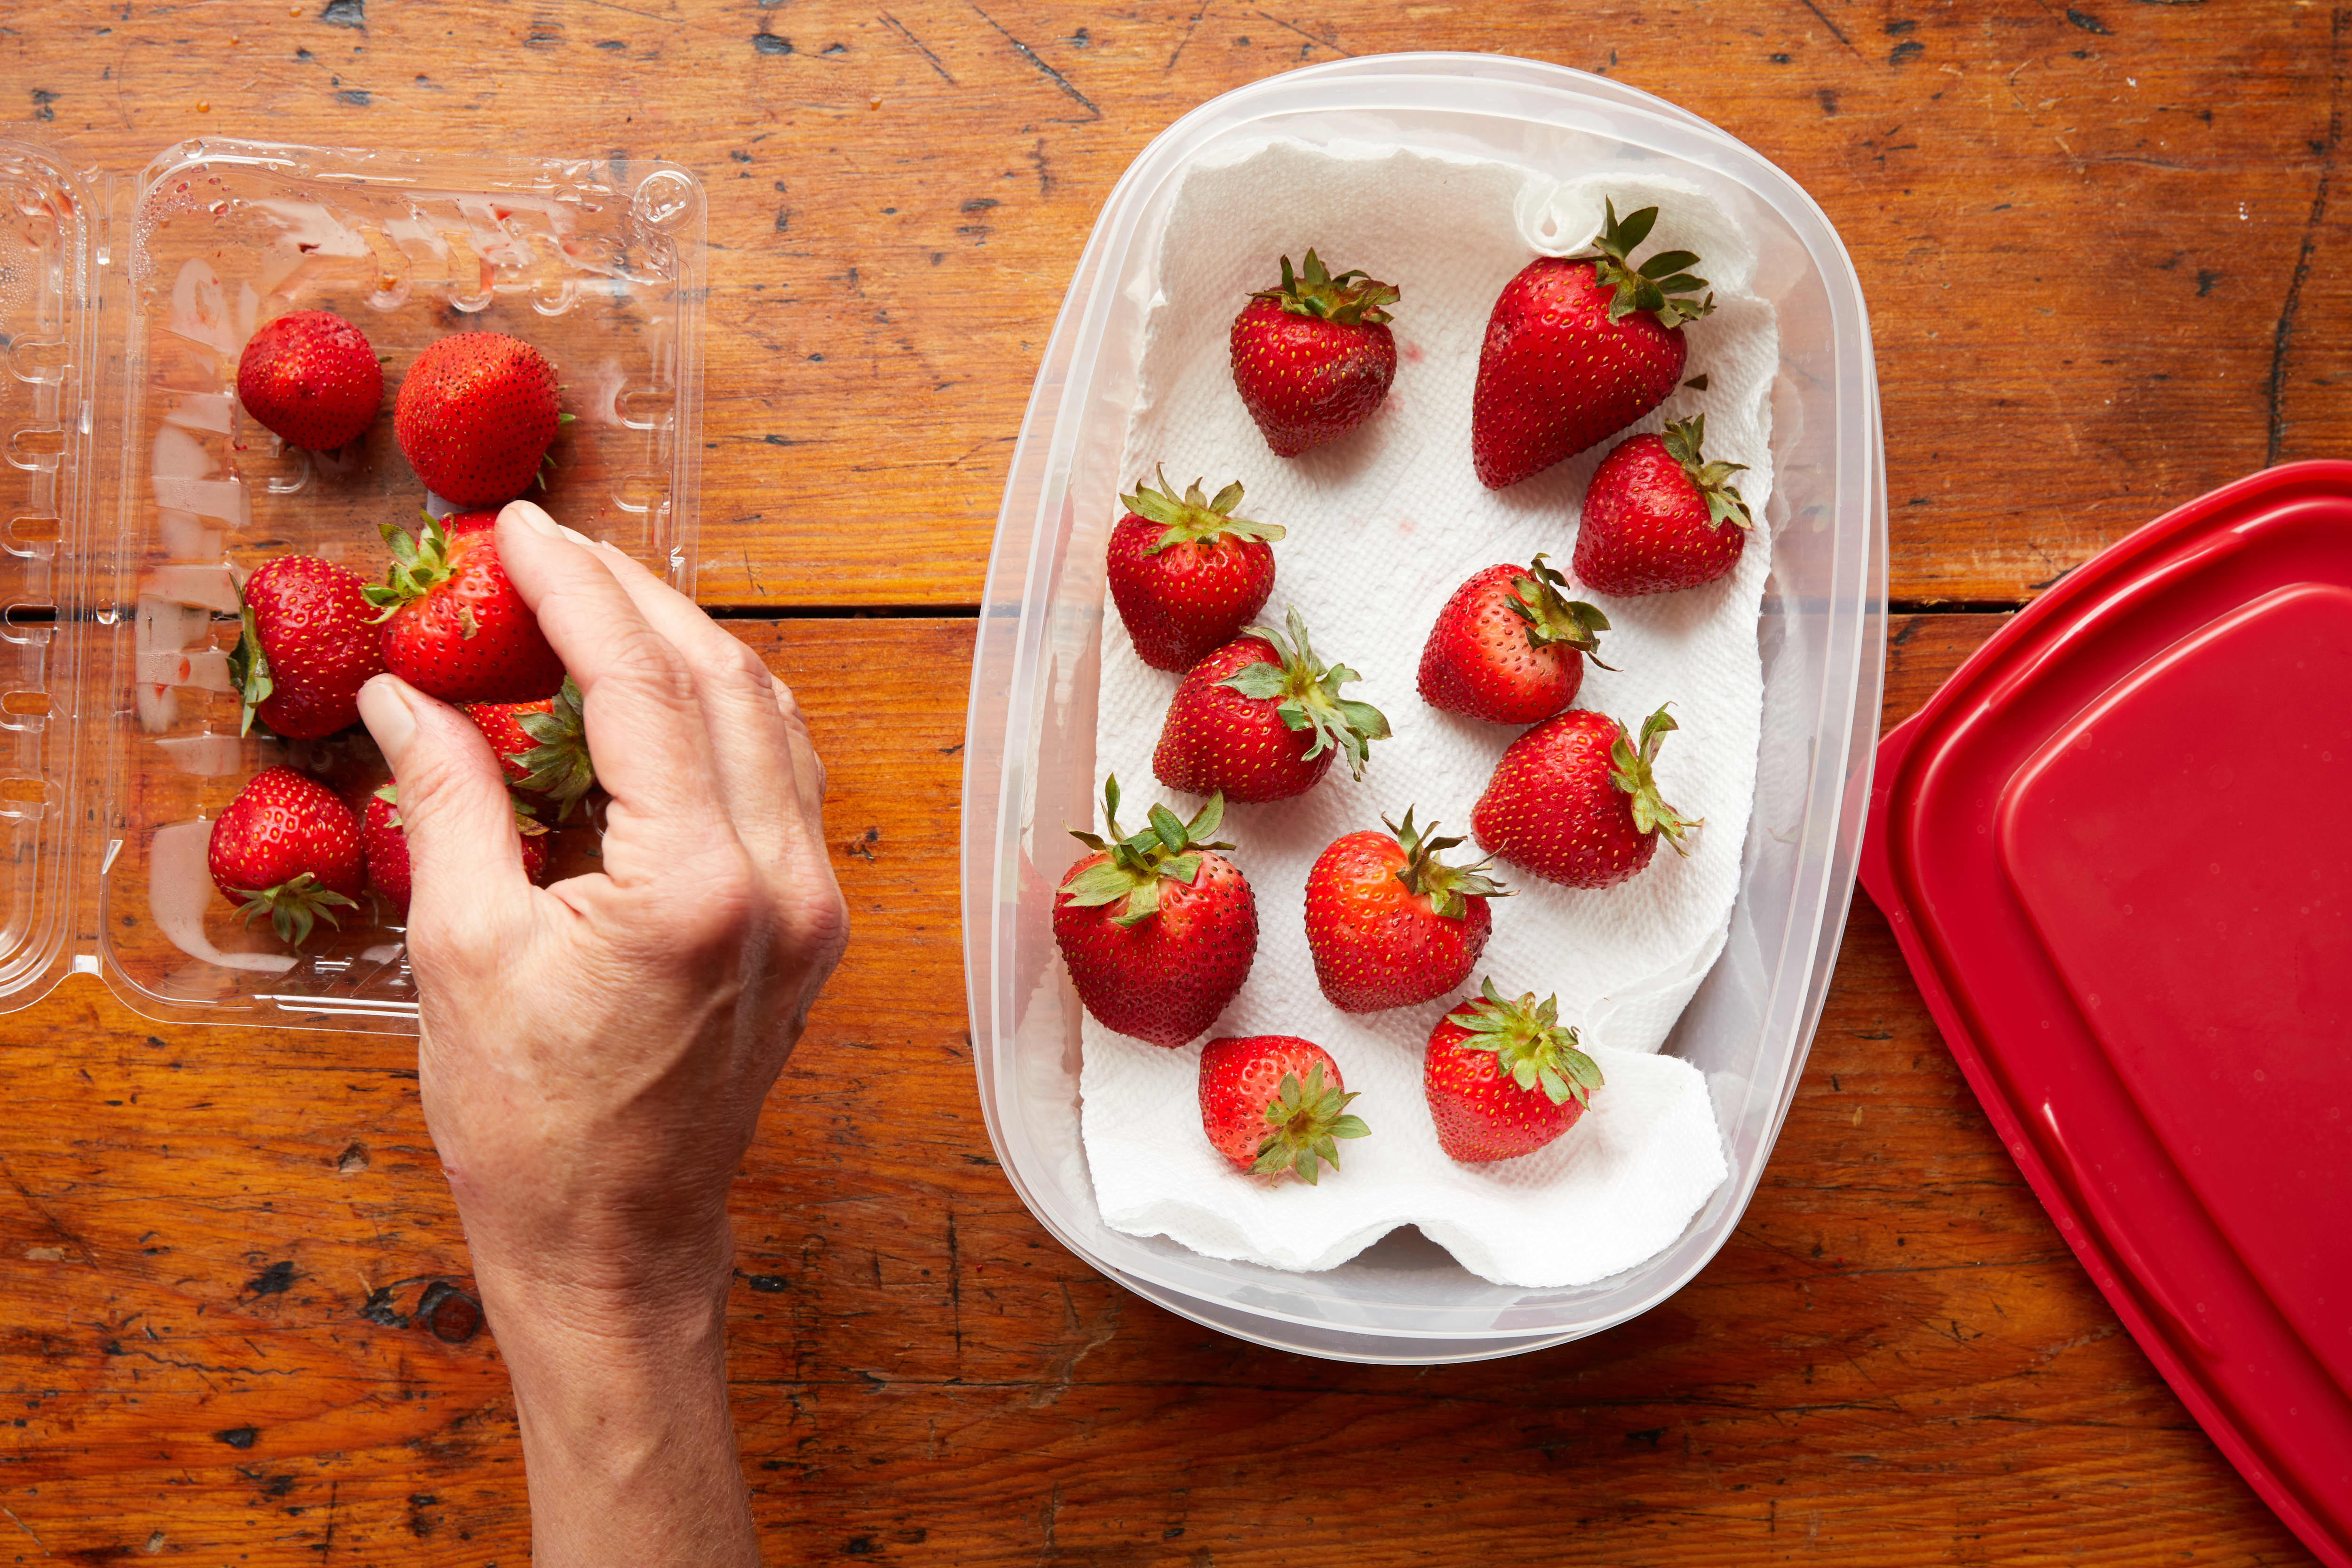 How to store strawberries – for lasting freshness